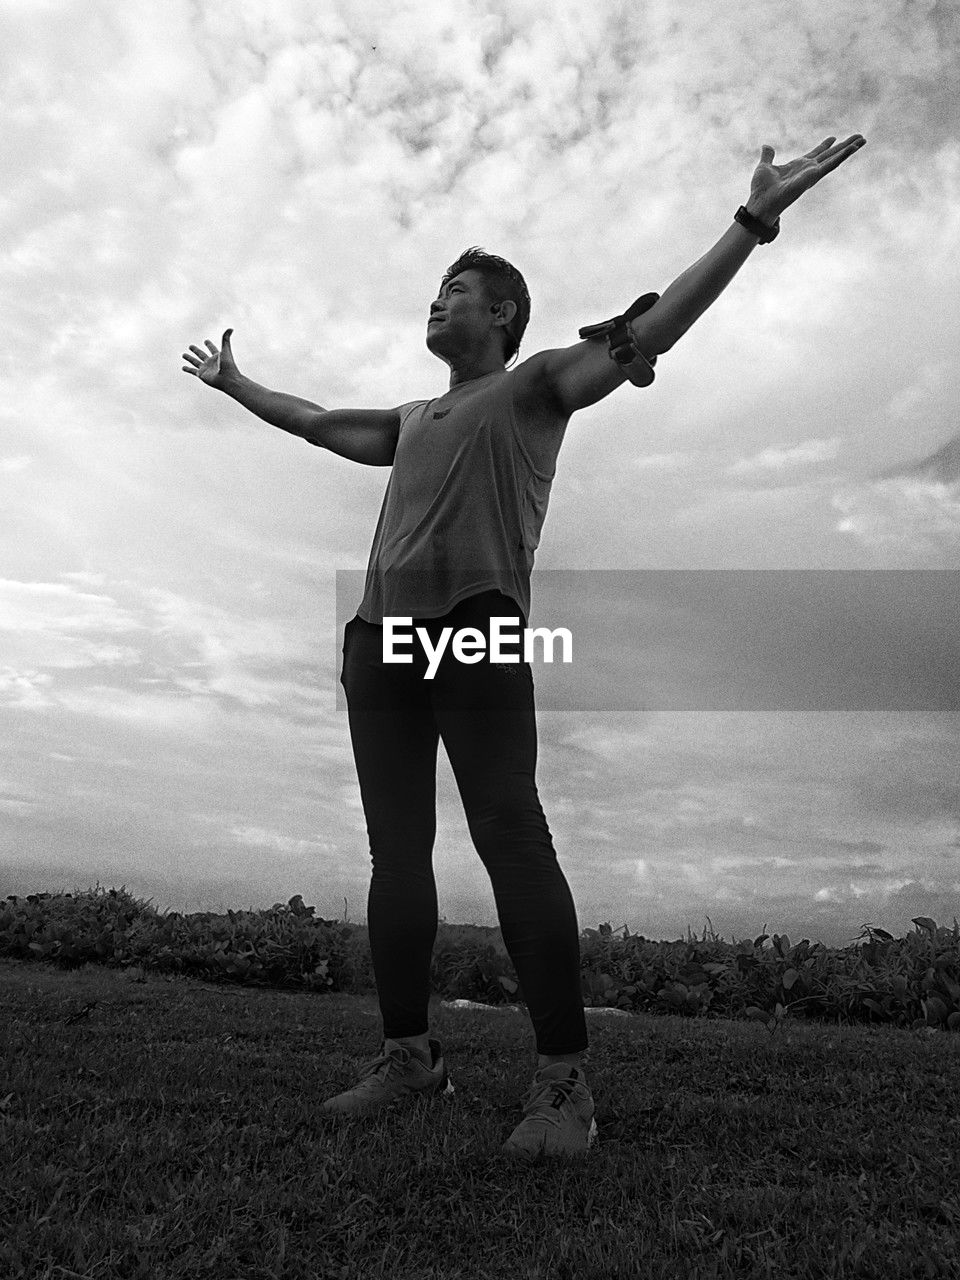 sky, cloud, black and white, one person, black, arm, limb, adult, white, monochrome photography, nature, human limb, full length, arms raised, standing, monochrome, arms outstretched, lifestyles, young adult, success, emotion, landscape, leisure activity, happiness, men, outdoors, environment, field, land, sports, day